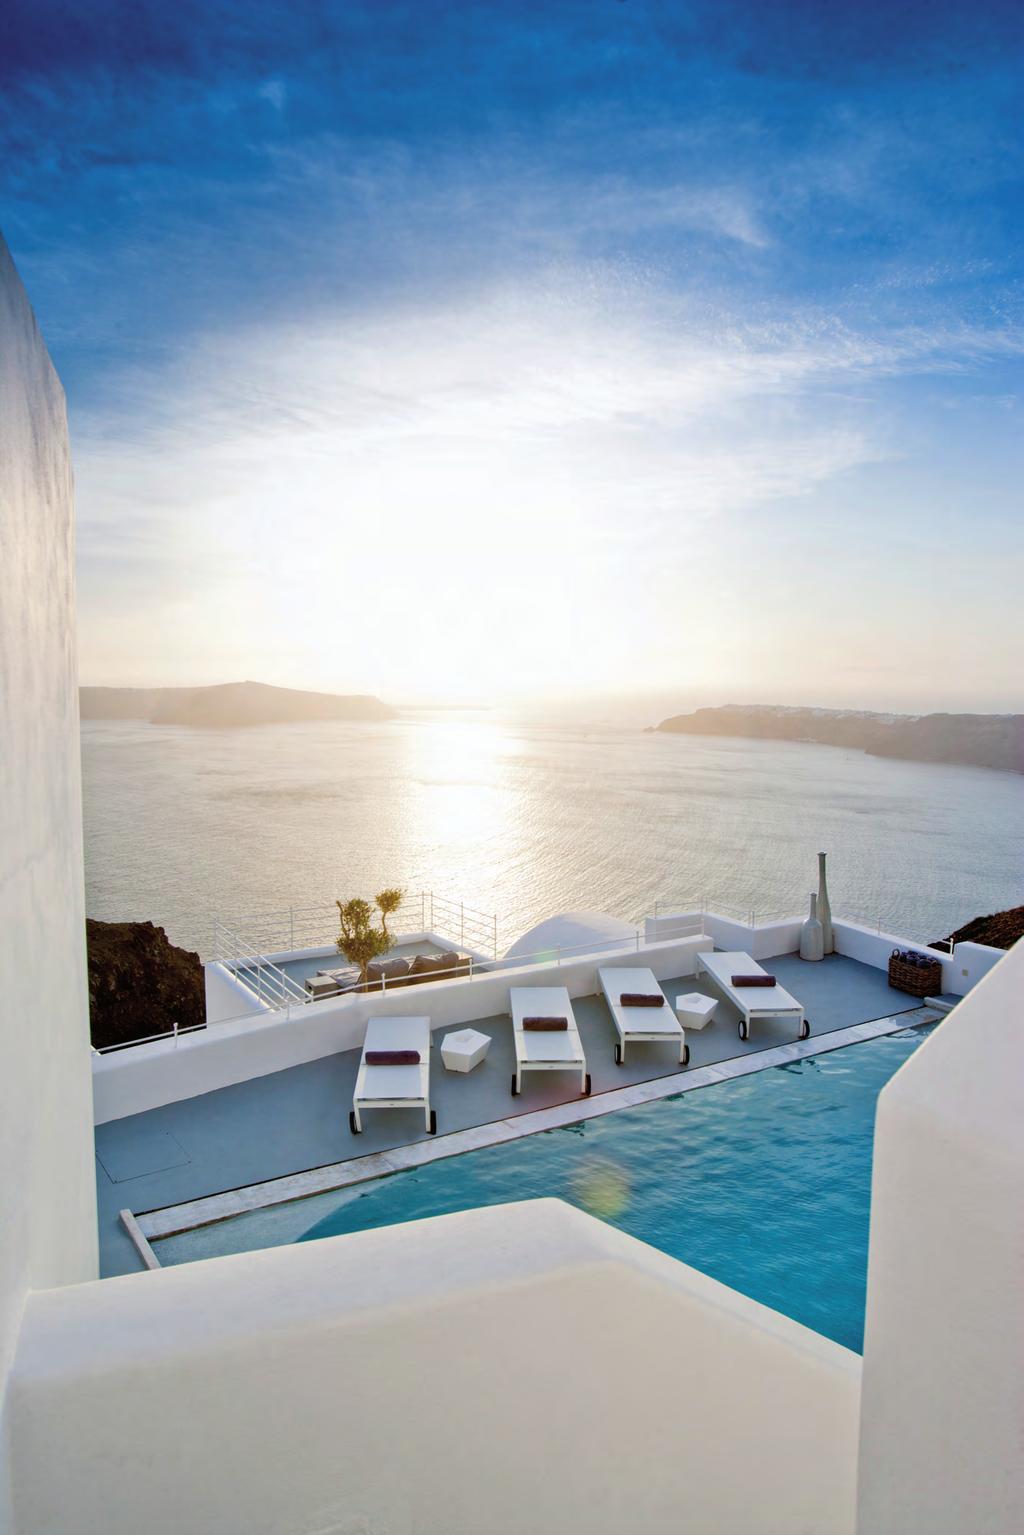 ACCOMMODATION All rooms and suites offer 180 degree unobstructed views of the Caldera and the famous Santorini sunset.